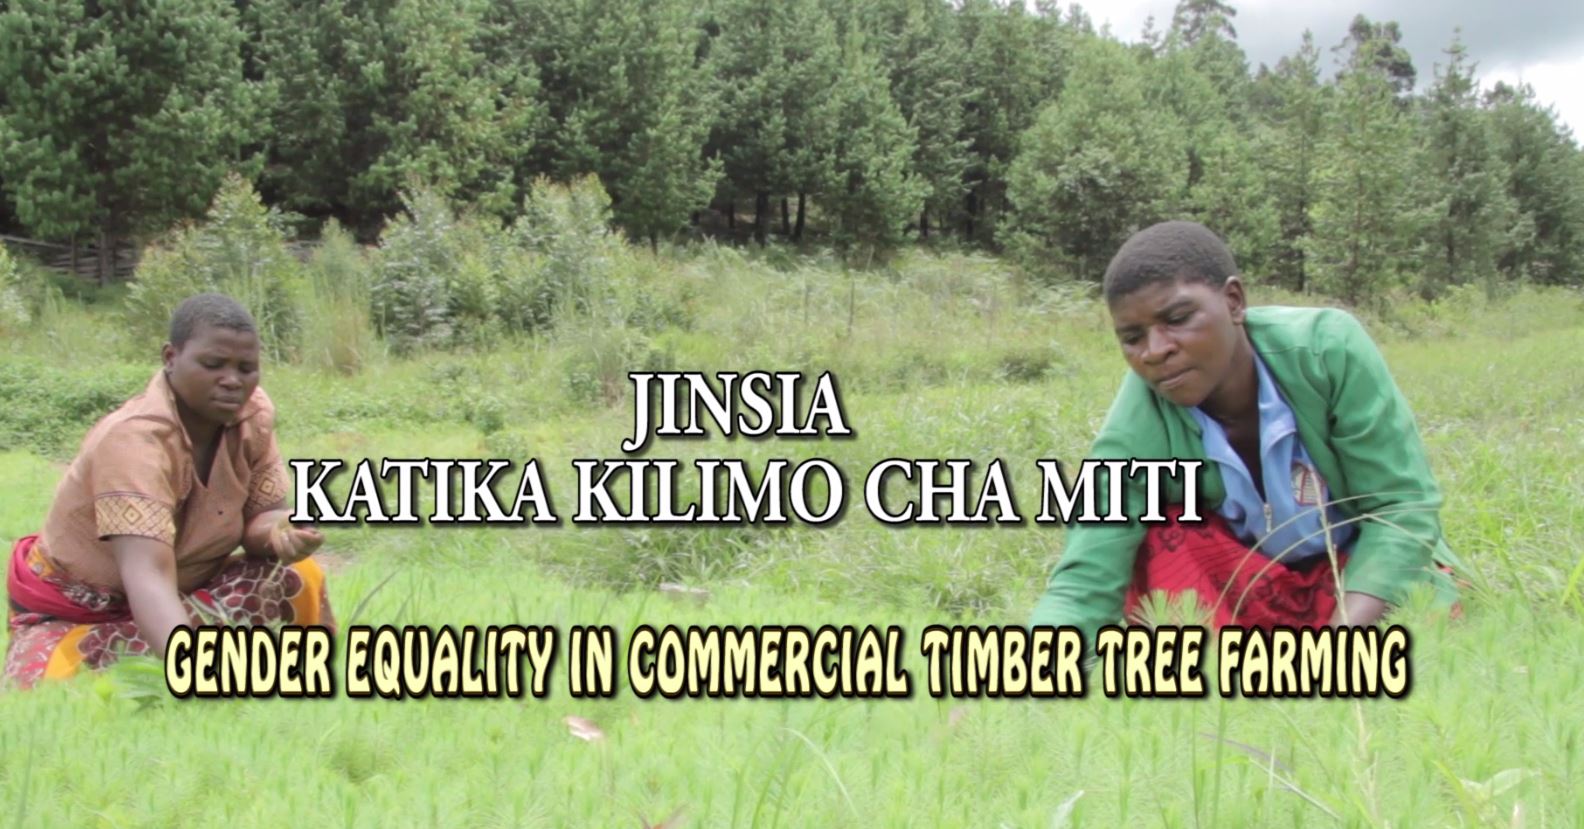 Genger equality in commercial Timber tree farming